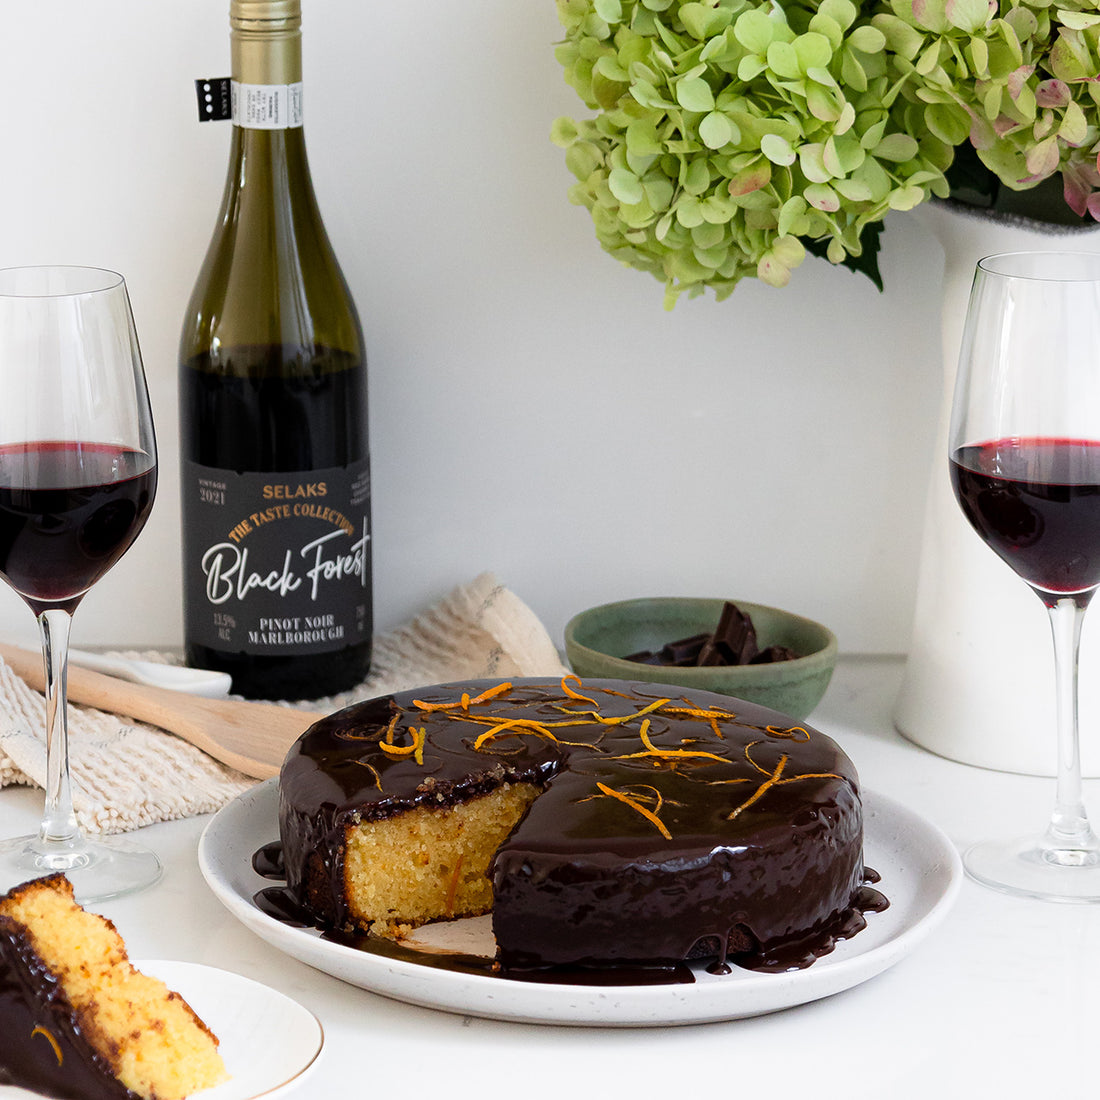 Decadent orange and chocolate cake Paired Perfectly with Selaks The Taste Collection Black Forest Pinot Noir